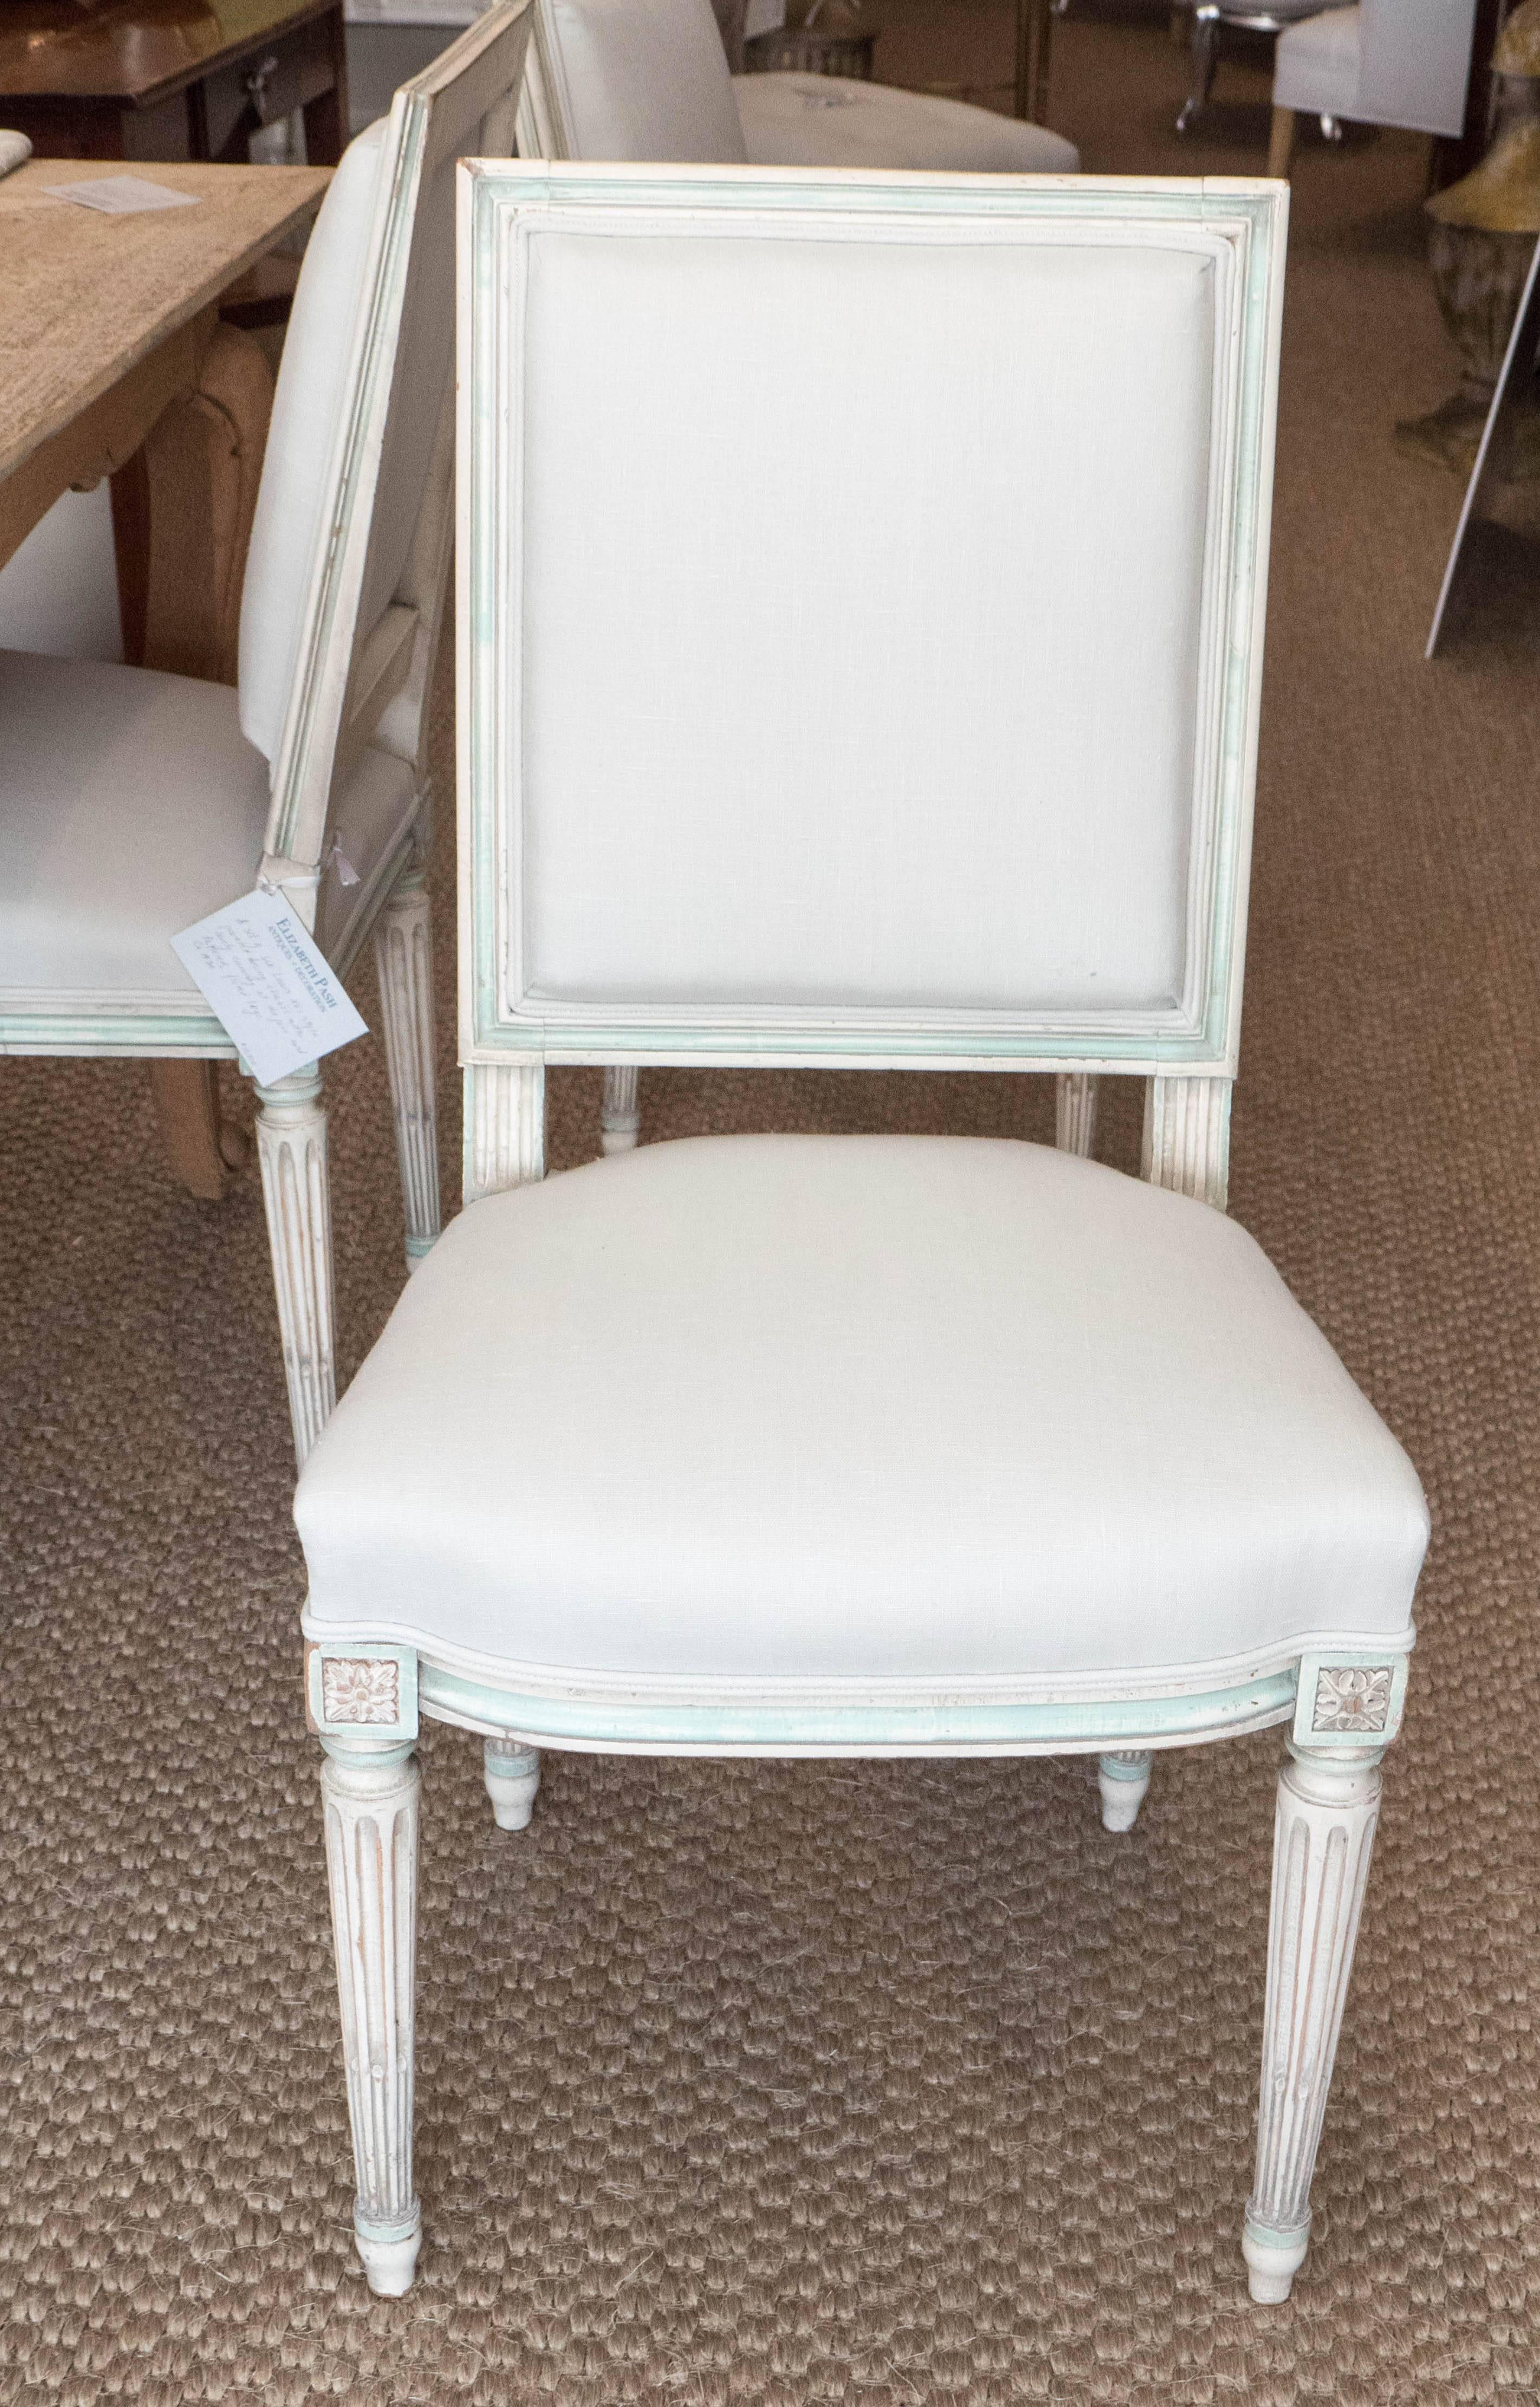 Timeless and elegant, these Louis XVI style chairs could feel at home in either contemporary or traditional surroundings. The back of the chair is squared, whereas the set is slightly curved, creating a gracious line. Painted in a grayish white,